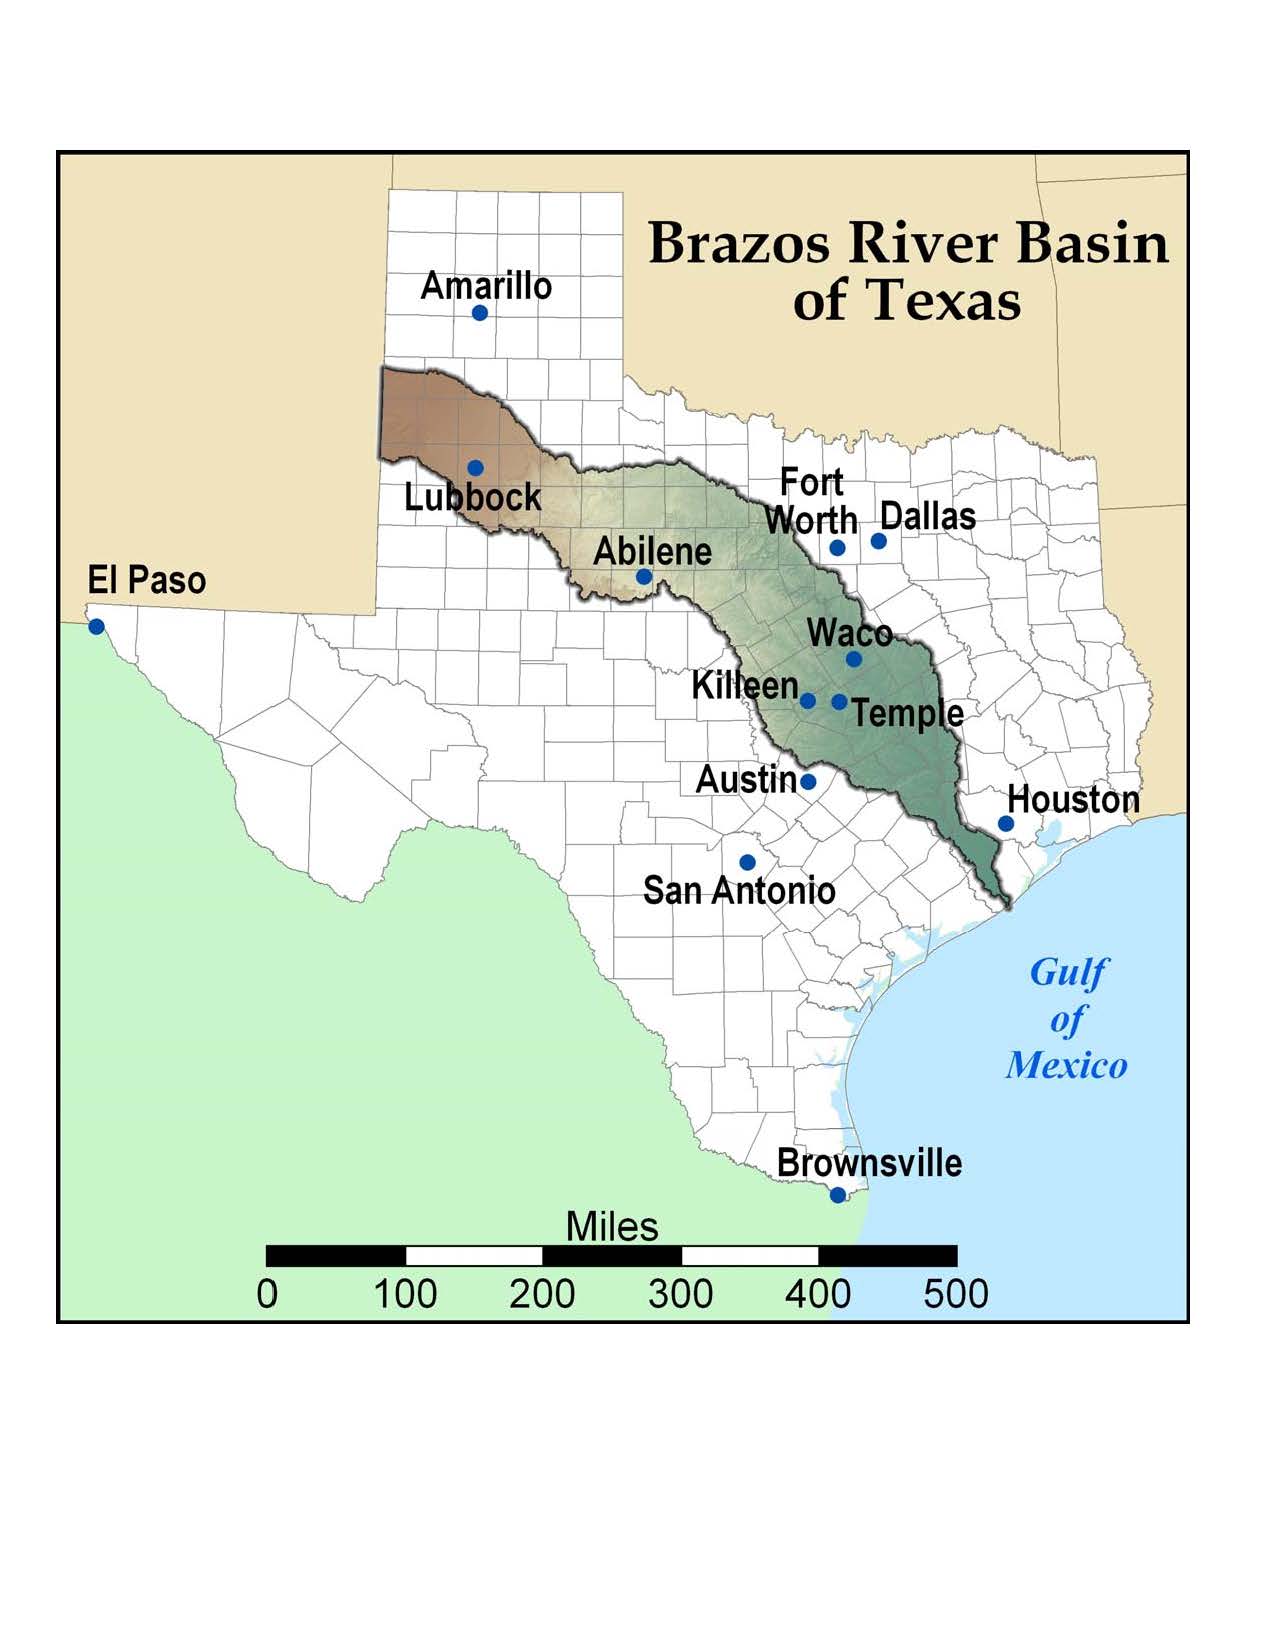 http://today.agrilife.org/wp-content/uploads/2013/01/BrazosRiverBasin-graphic.jpg